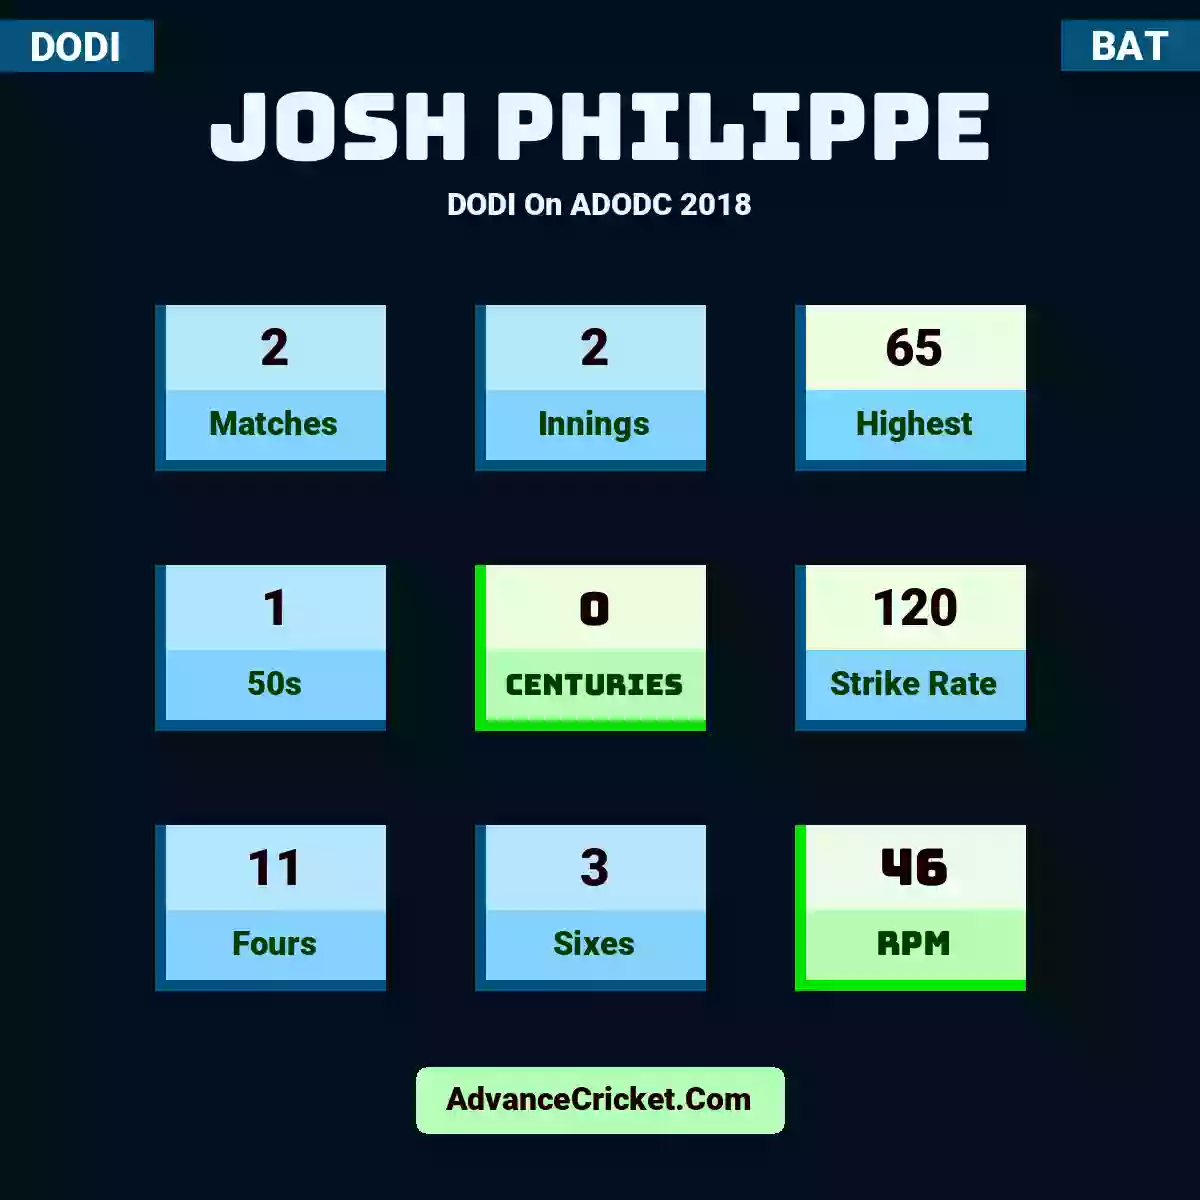 Josh Philippe DODI  On ADODC 2018, Josh Philippe played 2 matches, scored 65 runs as highest, 1 half-centuries, and 0 centuries, with a strike rate of 120. J.Philippe hit 11 fours and 3 sixes, with an RPM of 46.